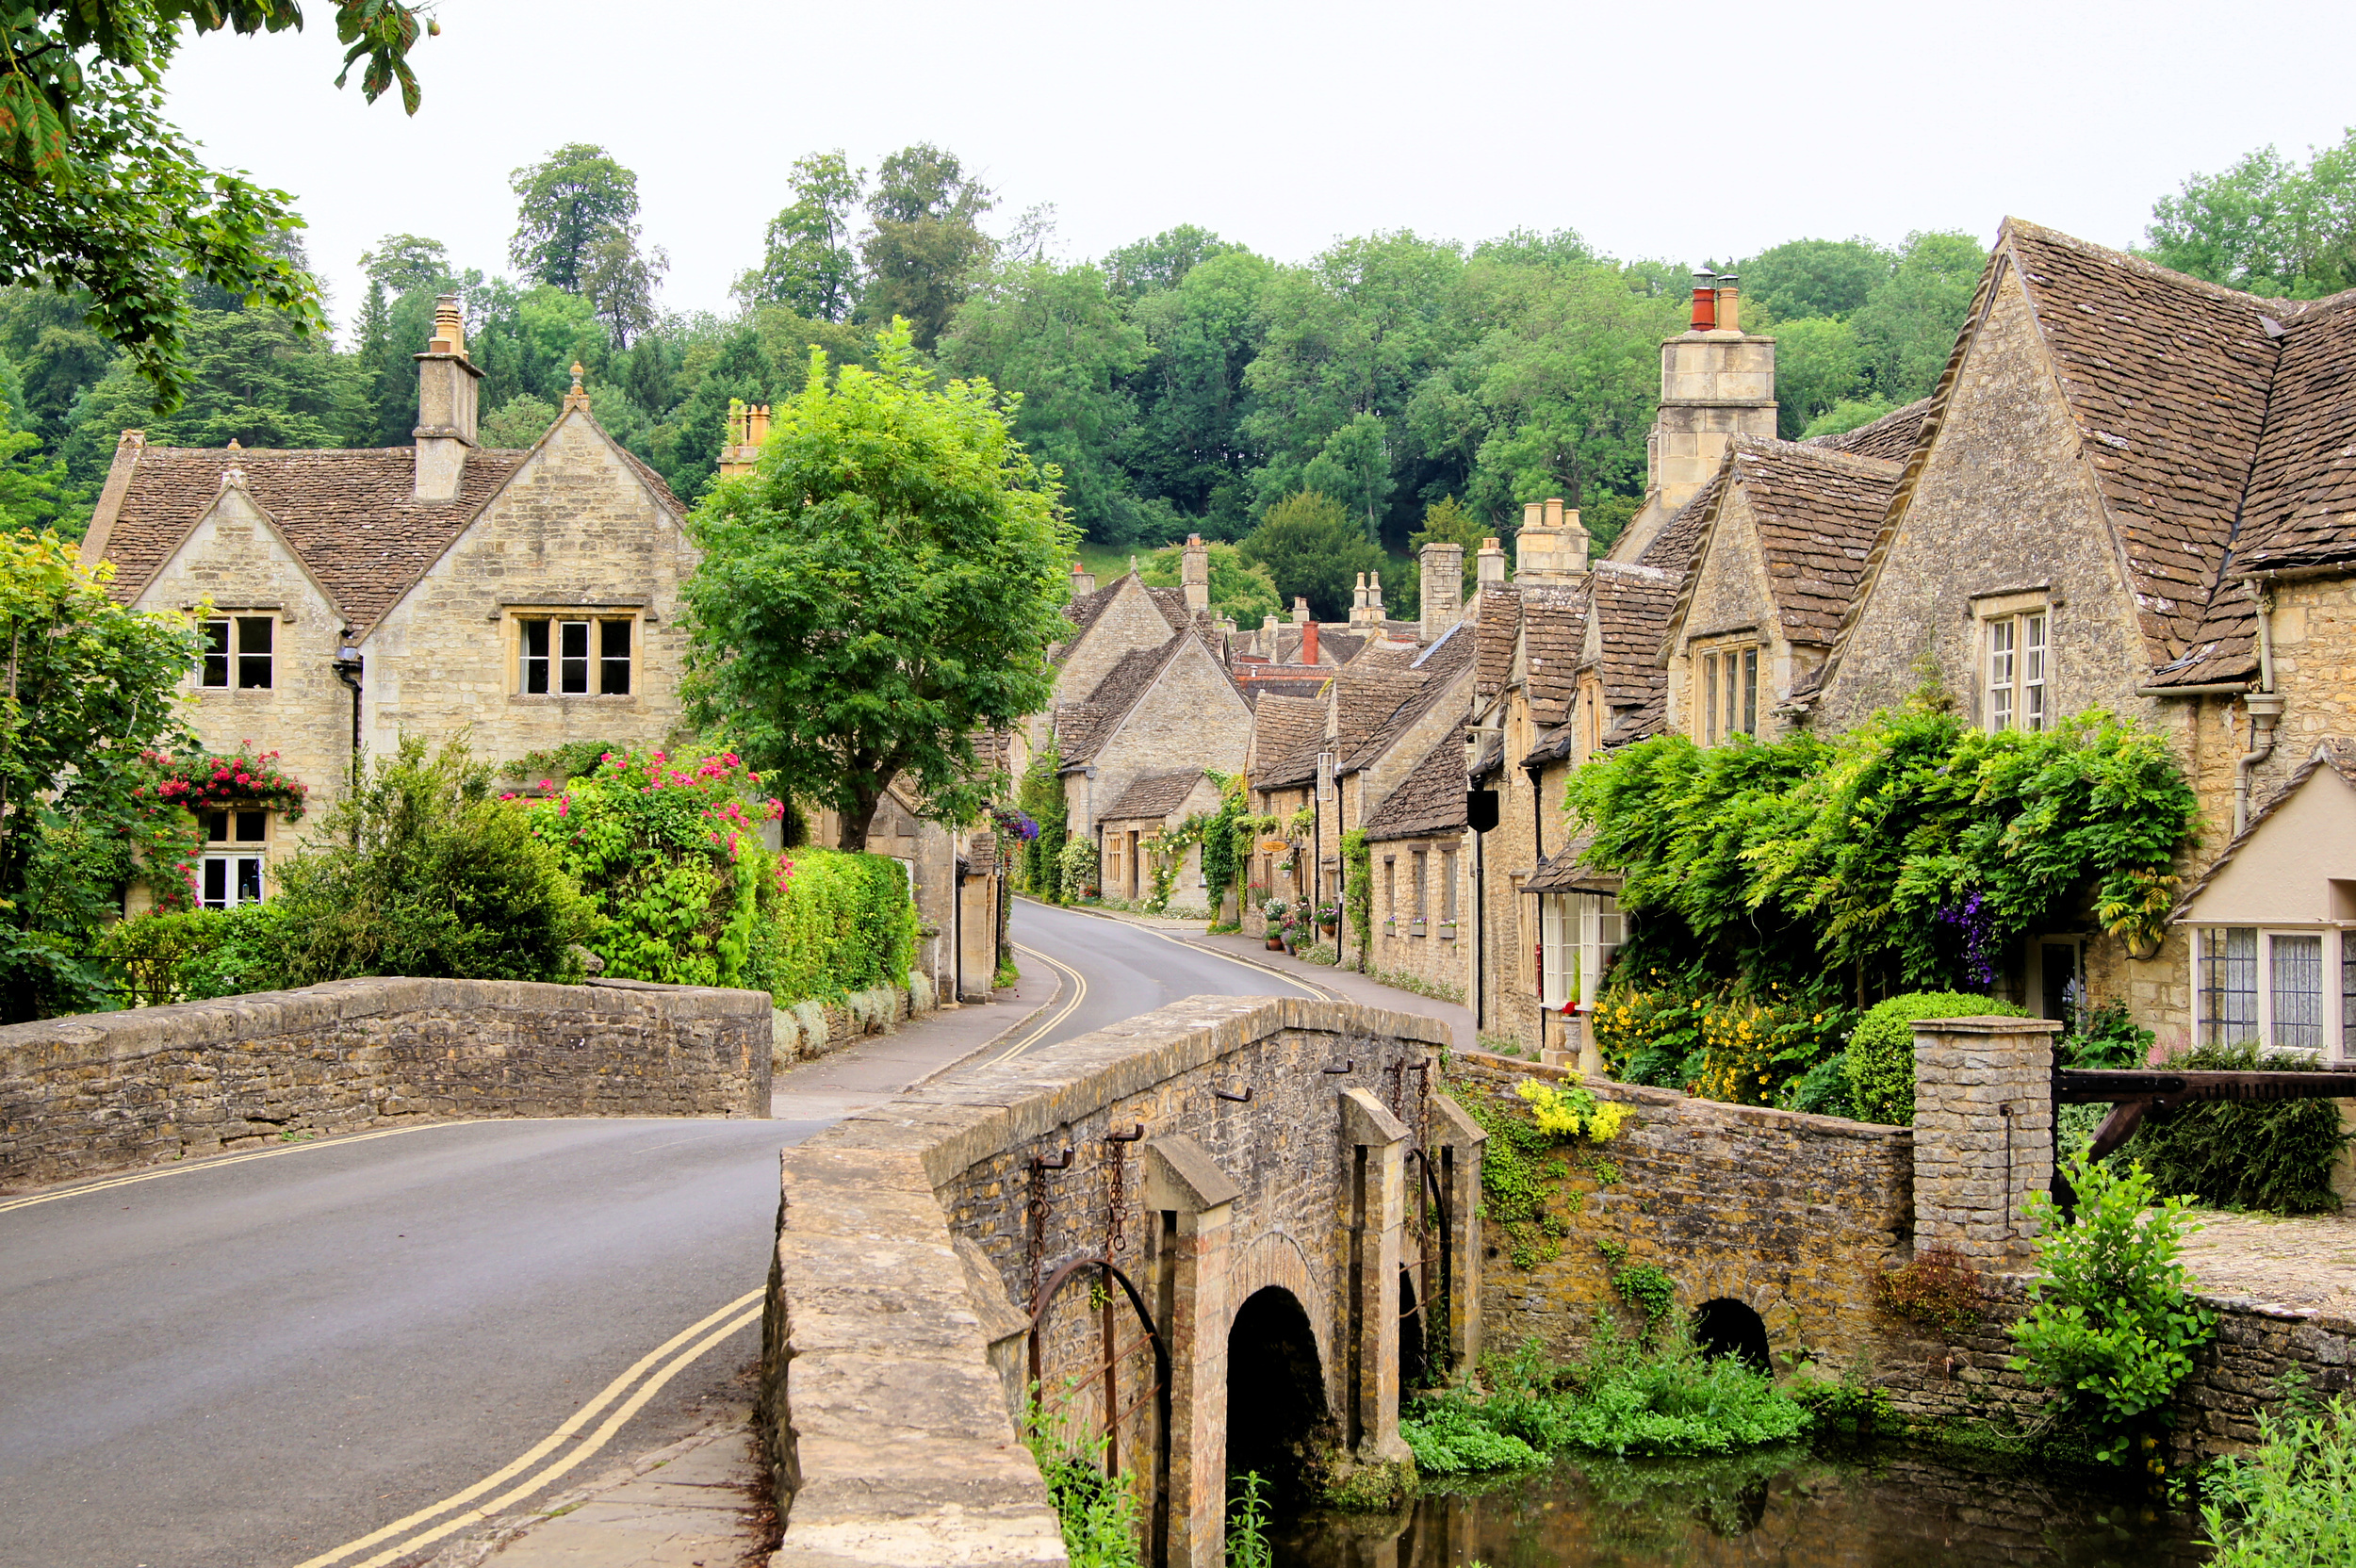 <p>This storybook part of the United Kingdom is full of adorable thatched cottages, scenic walking routes, and villages plucked from a Miss Marple episode. The towns are best explored with a car but can also be walked between if you’re keen on some hiking!</p><p>You may also like: <a href='https://www.yardbarker.com/lifestyle/articles/11_most_scenic_pacific_northwest_road_trips_021824/s1__38393677'>11 most scenic Pacific Northwest road trips</a></p>